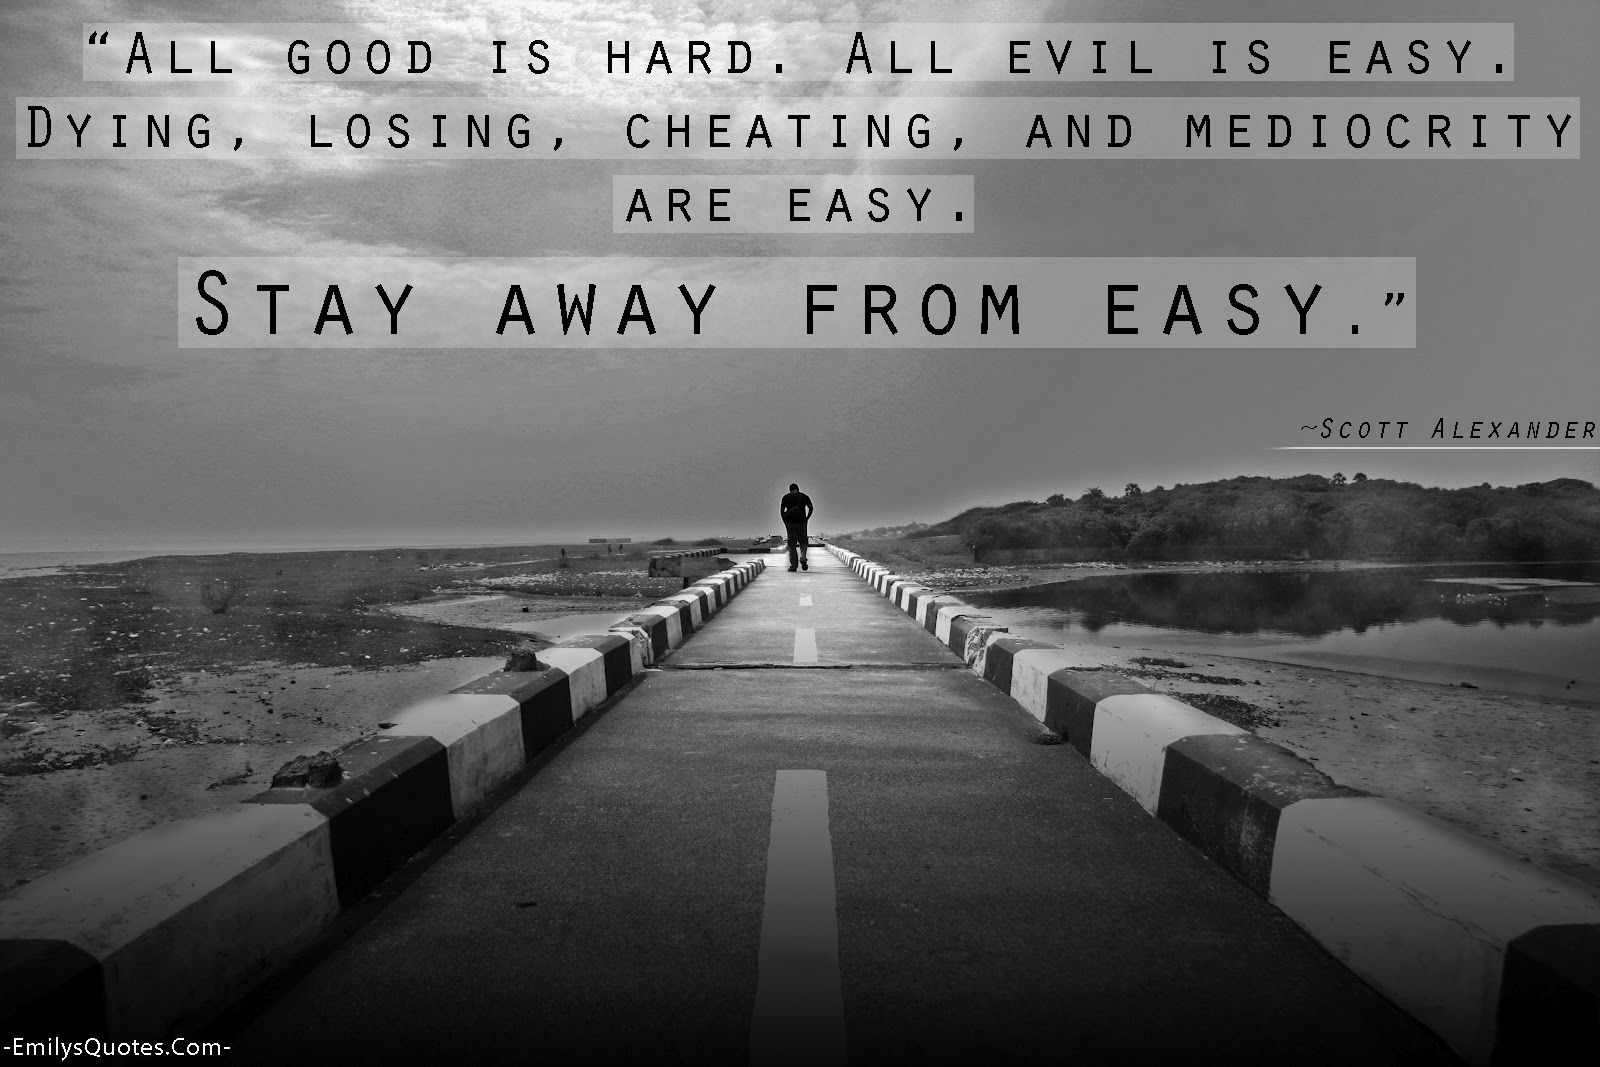 All good is hard. All evil is easy. Dying, losing, cheating, and mediocrity are easy. Stay away from easy